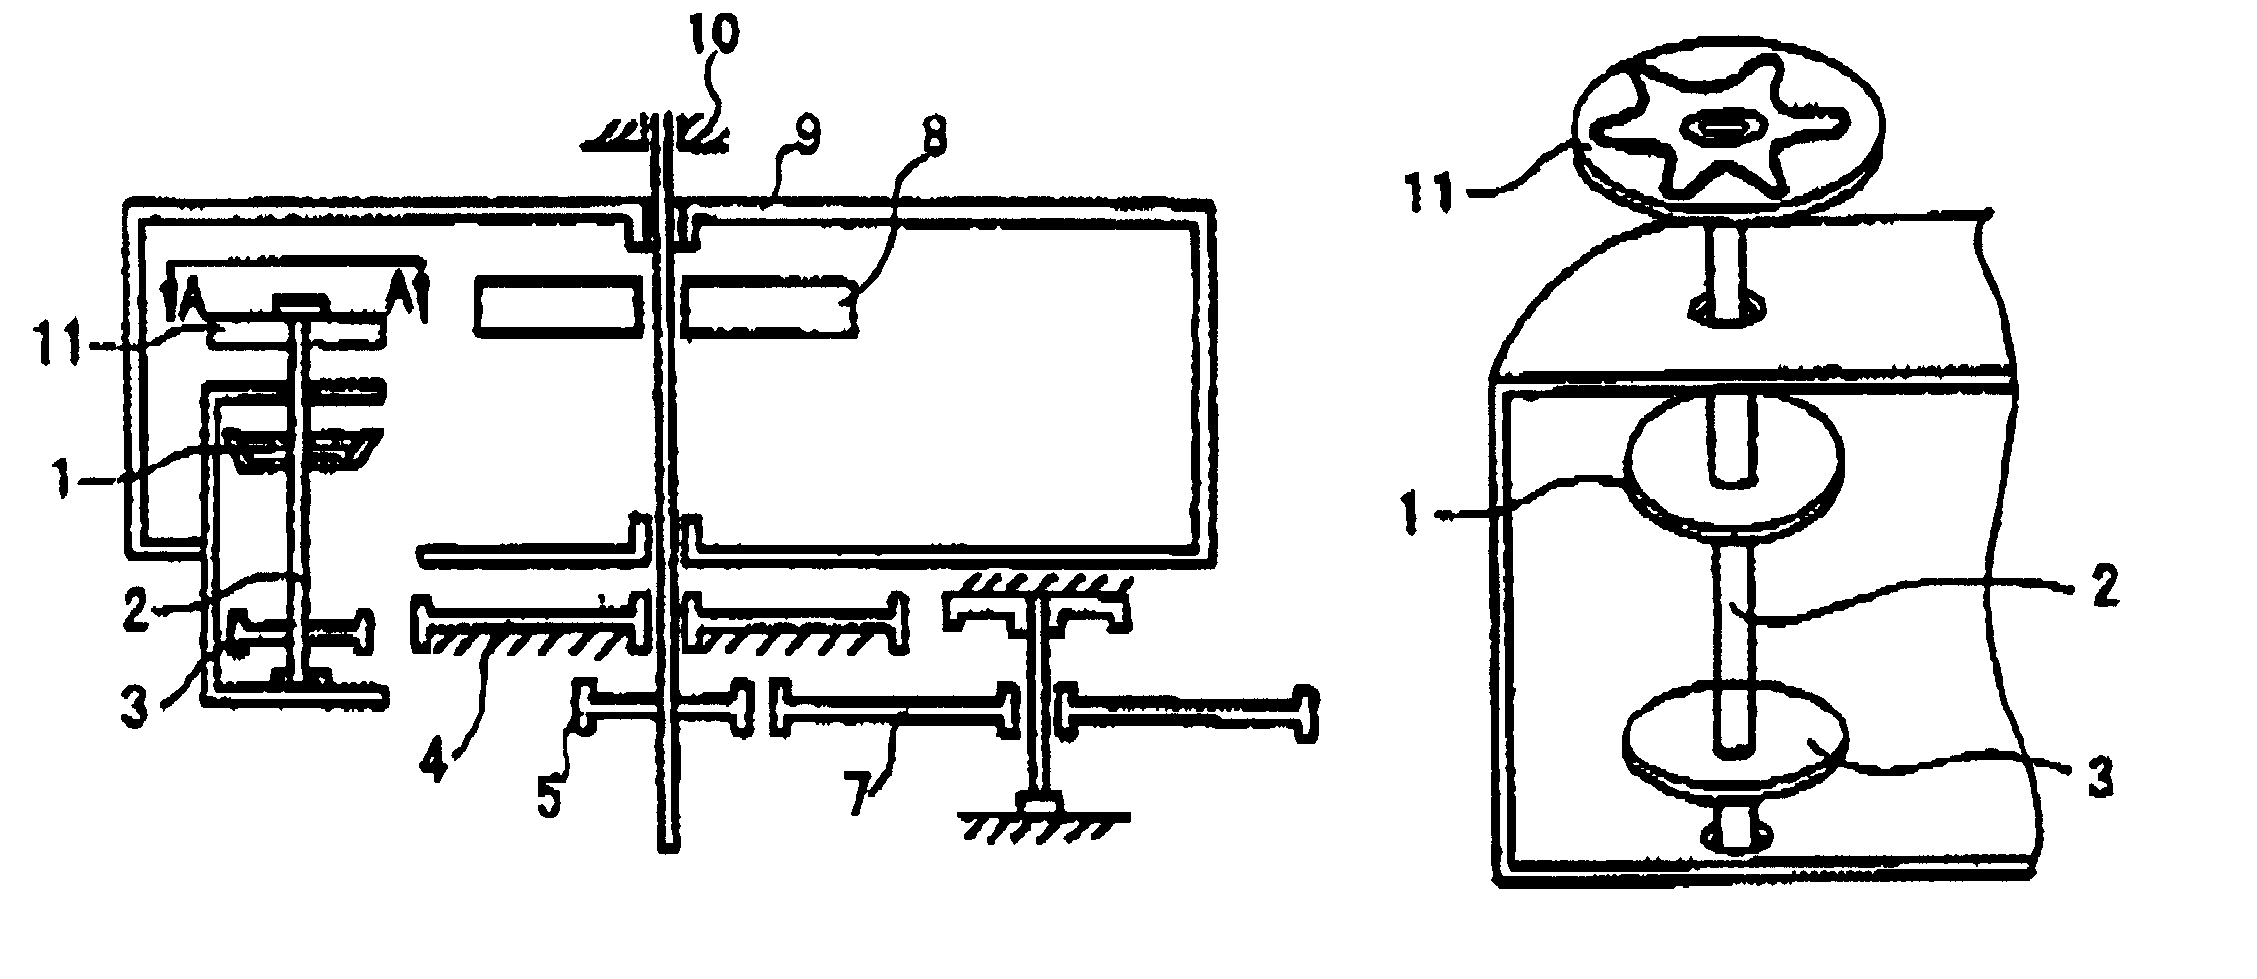 Indicating device for various types of rotation escape regulator